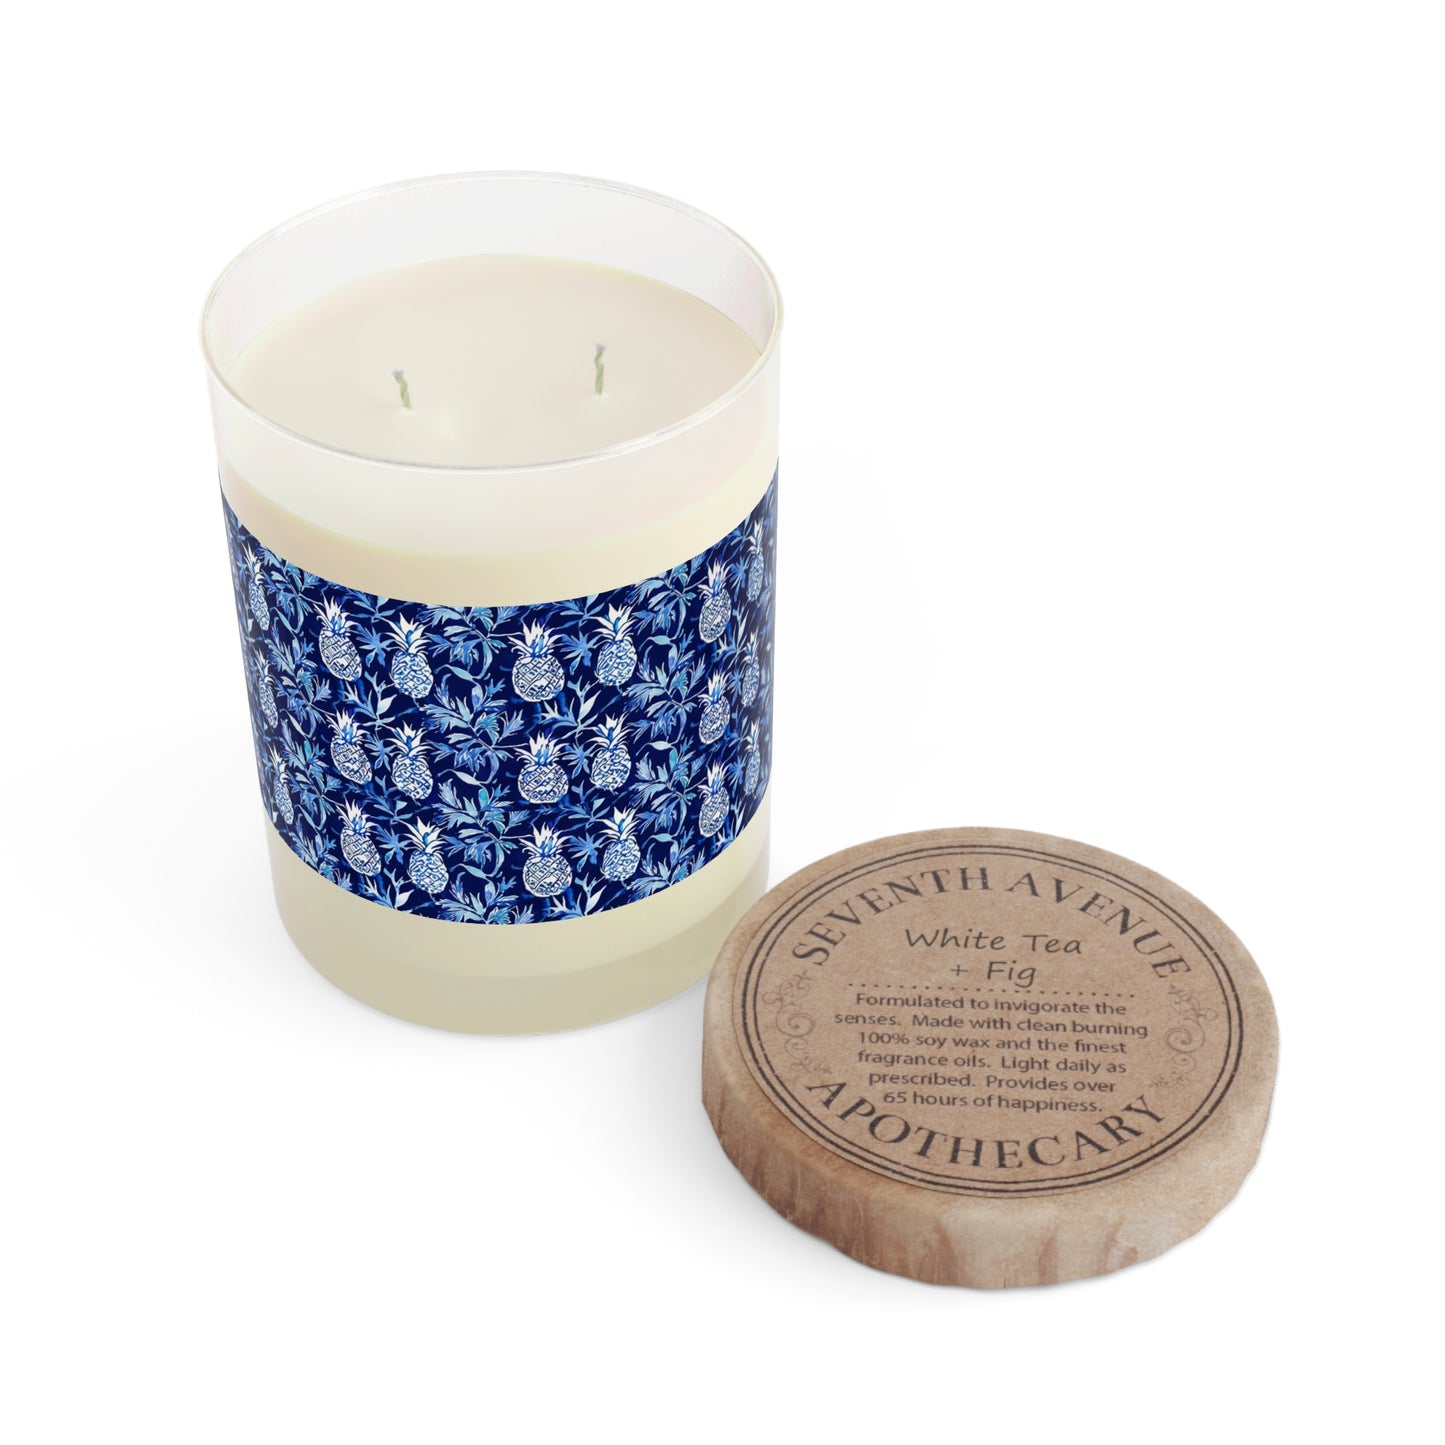 Blue and White Pineapple Batik Aromatherapy Essential Oils Natural Scented Candle - Full Glass, 11oz